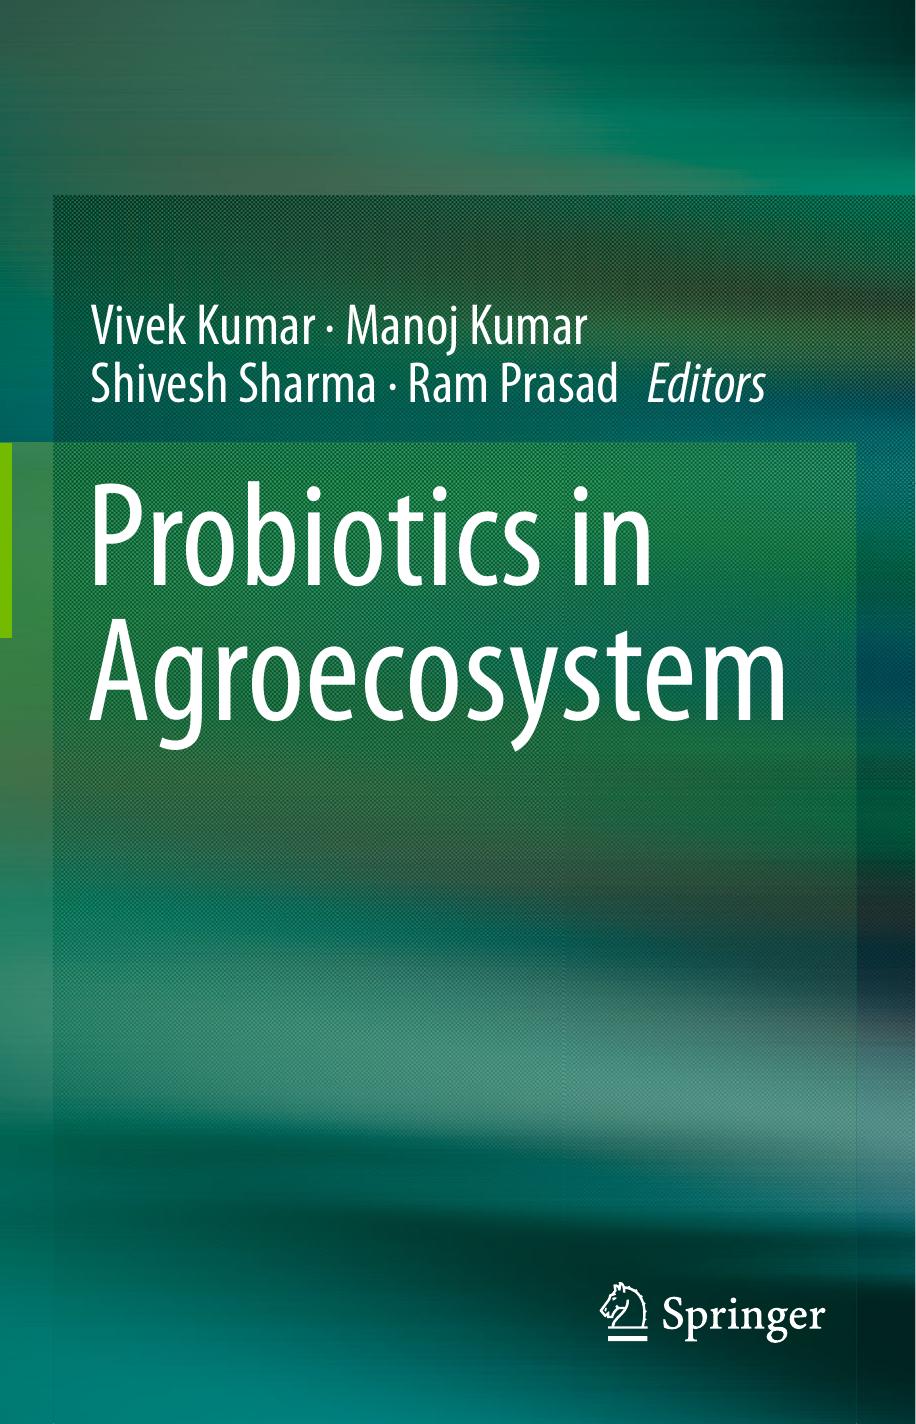 Probiotics in agroecosystem ( PDFDrive )-1